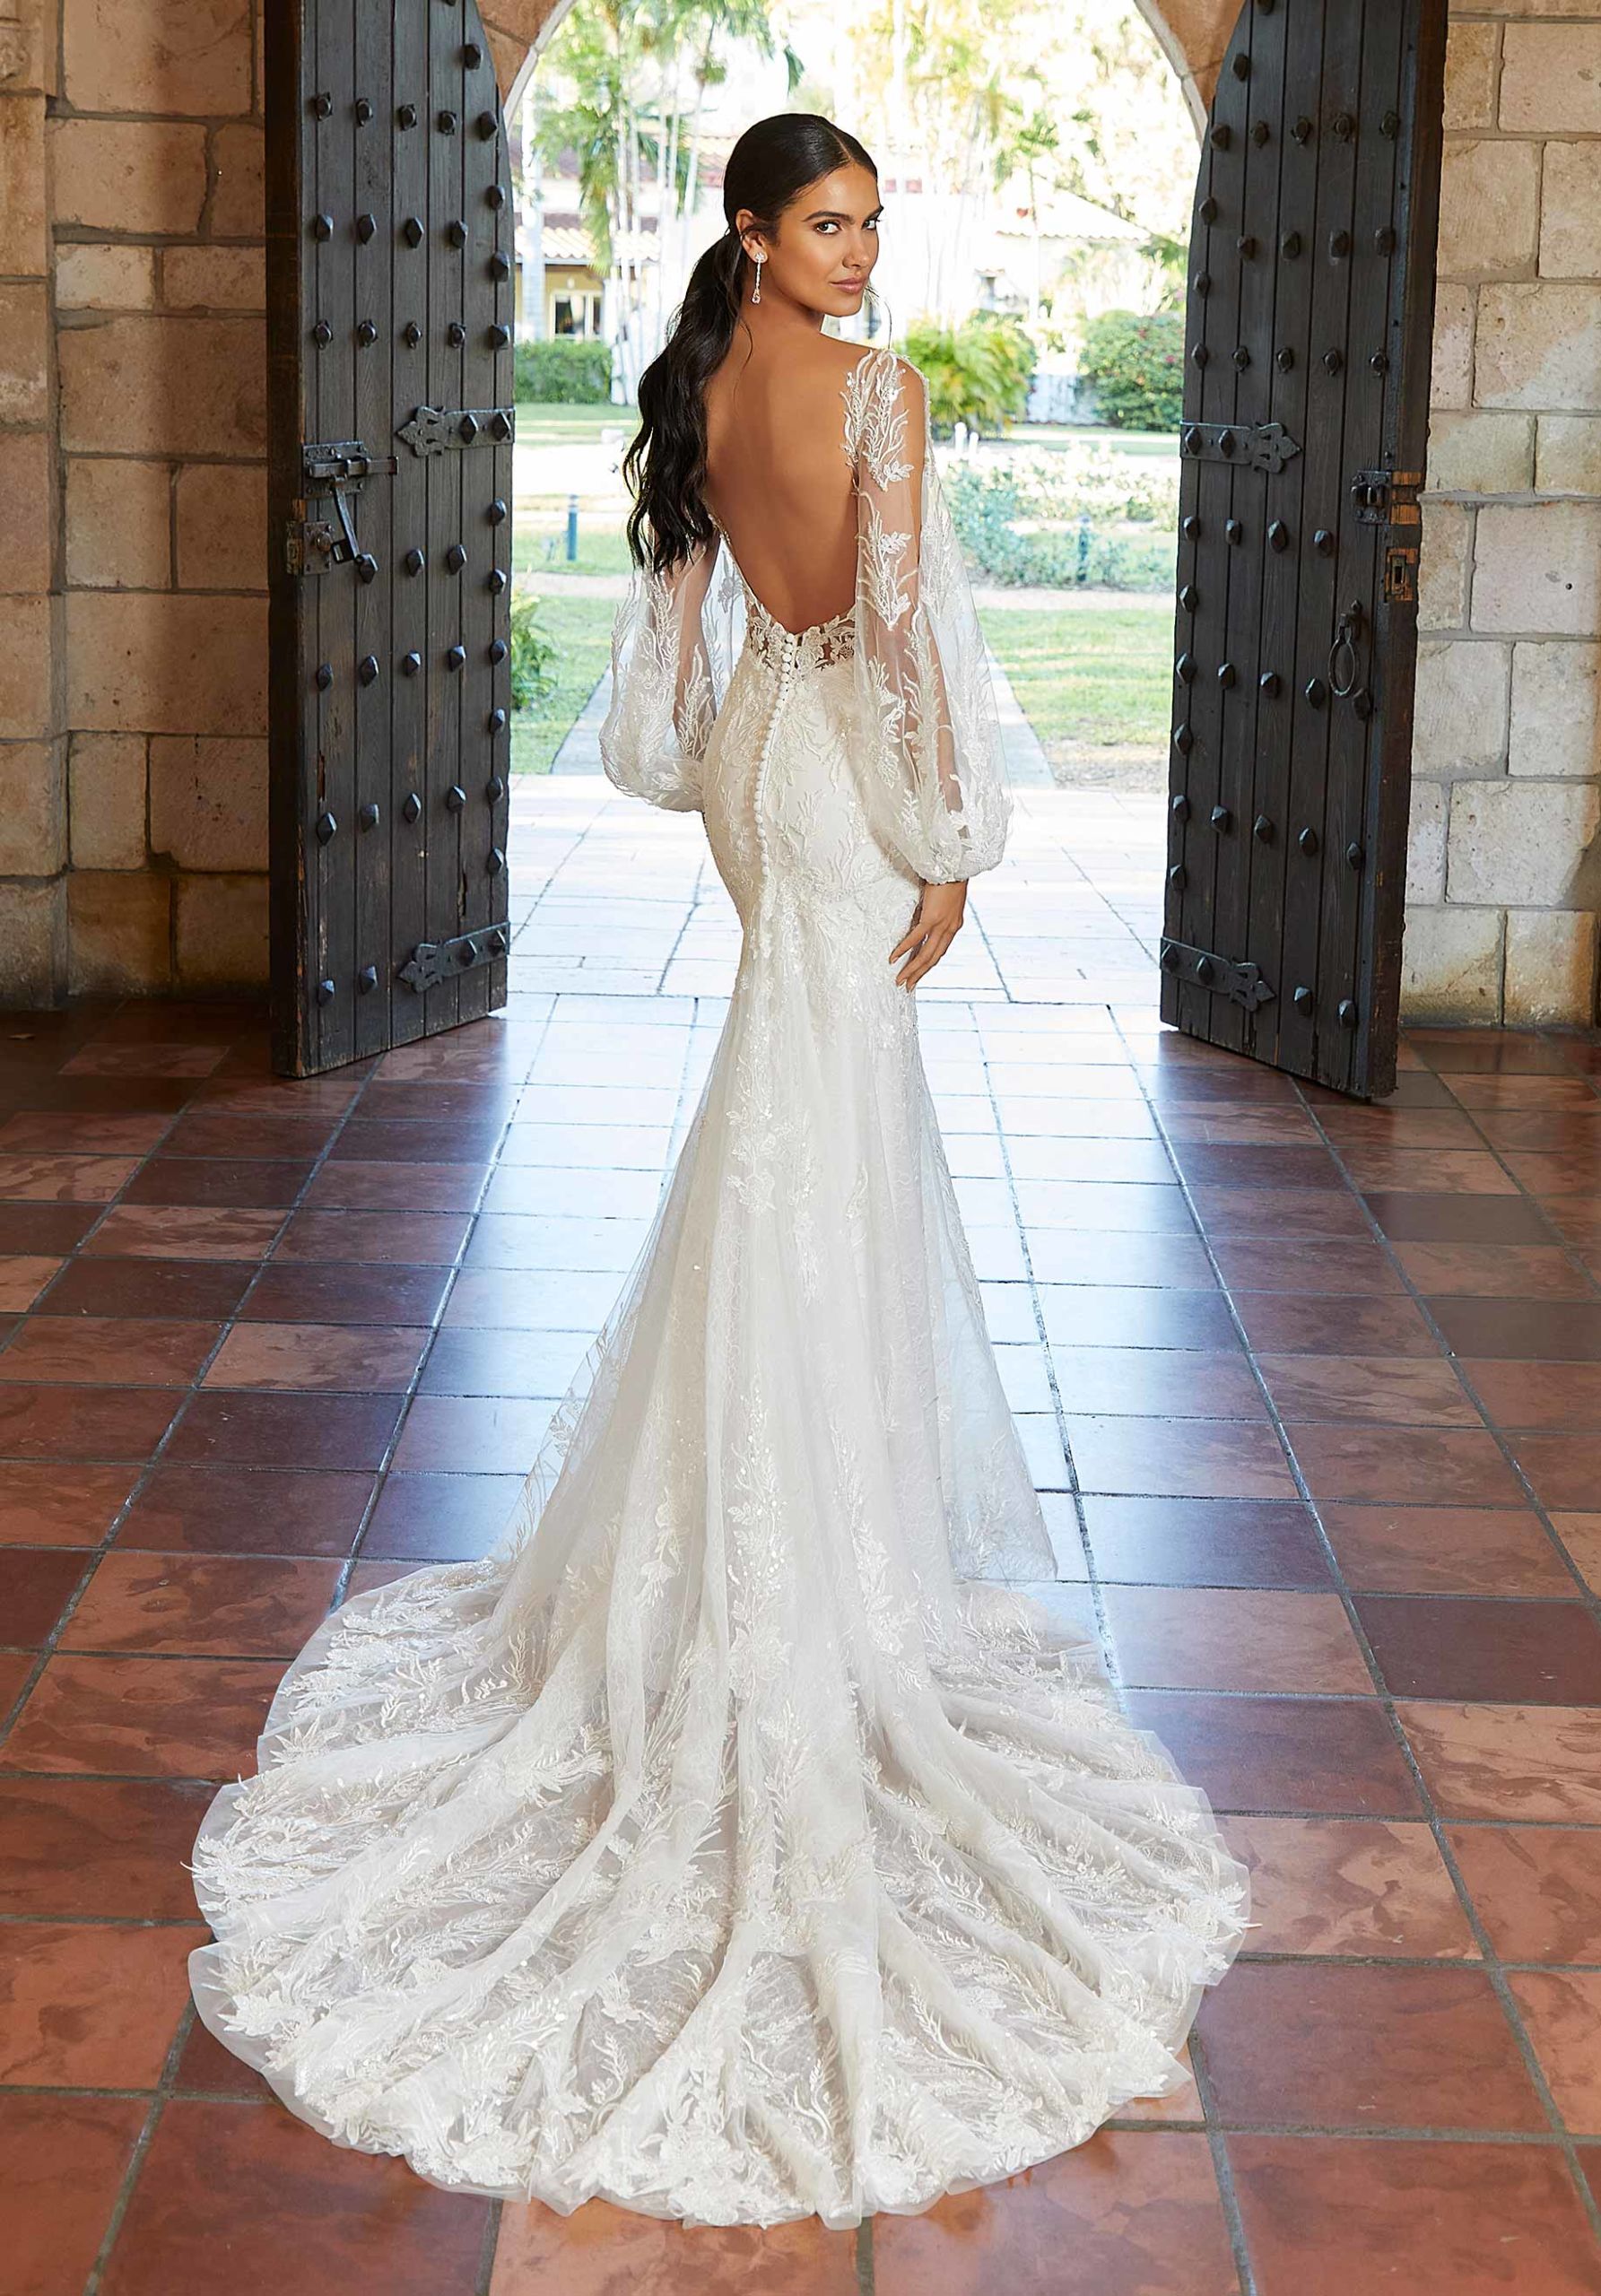 Lace Wedding Dress, Low Open Back Wedding Dress, Low Plunging